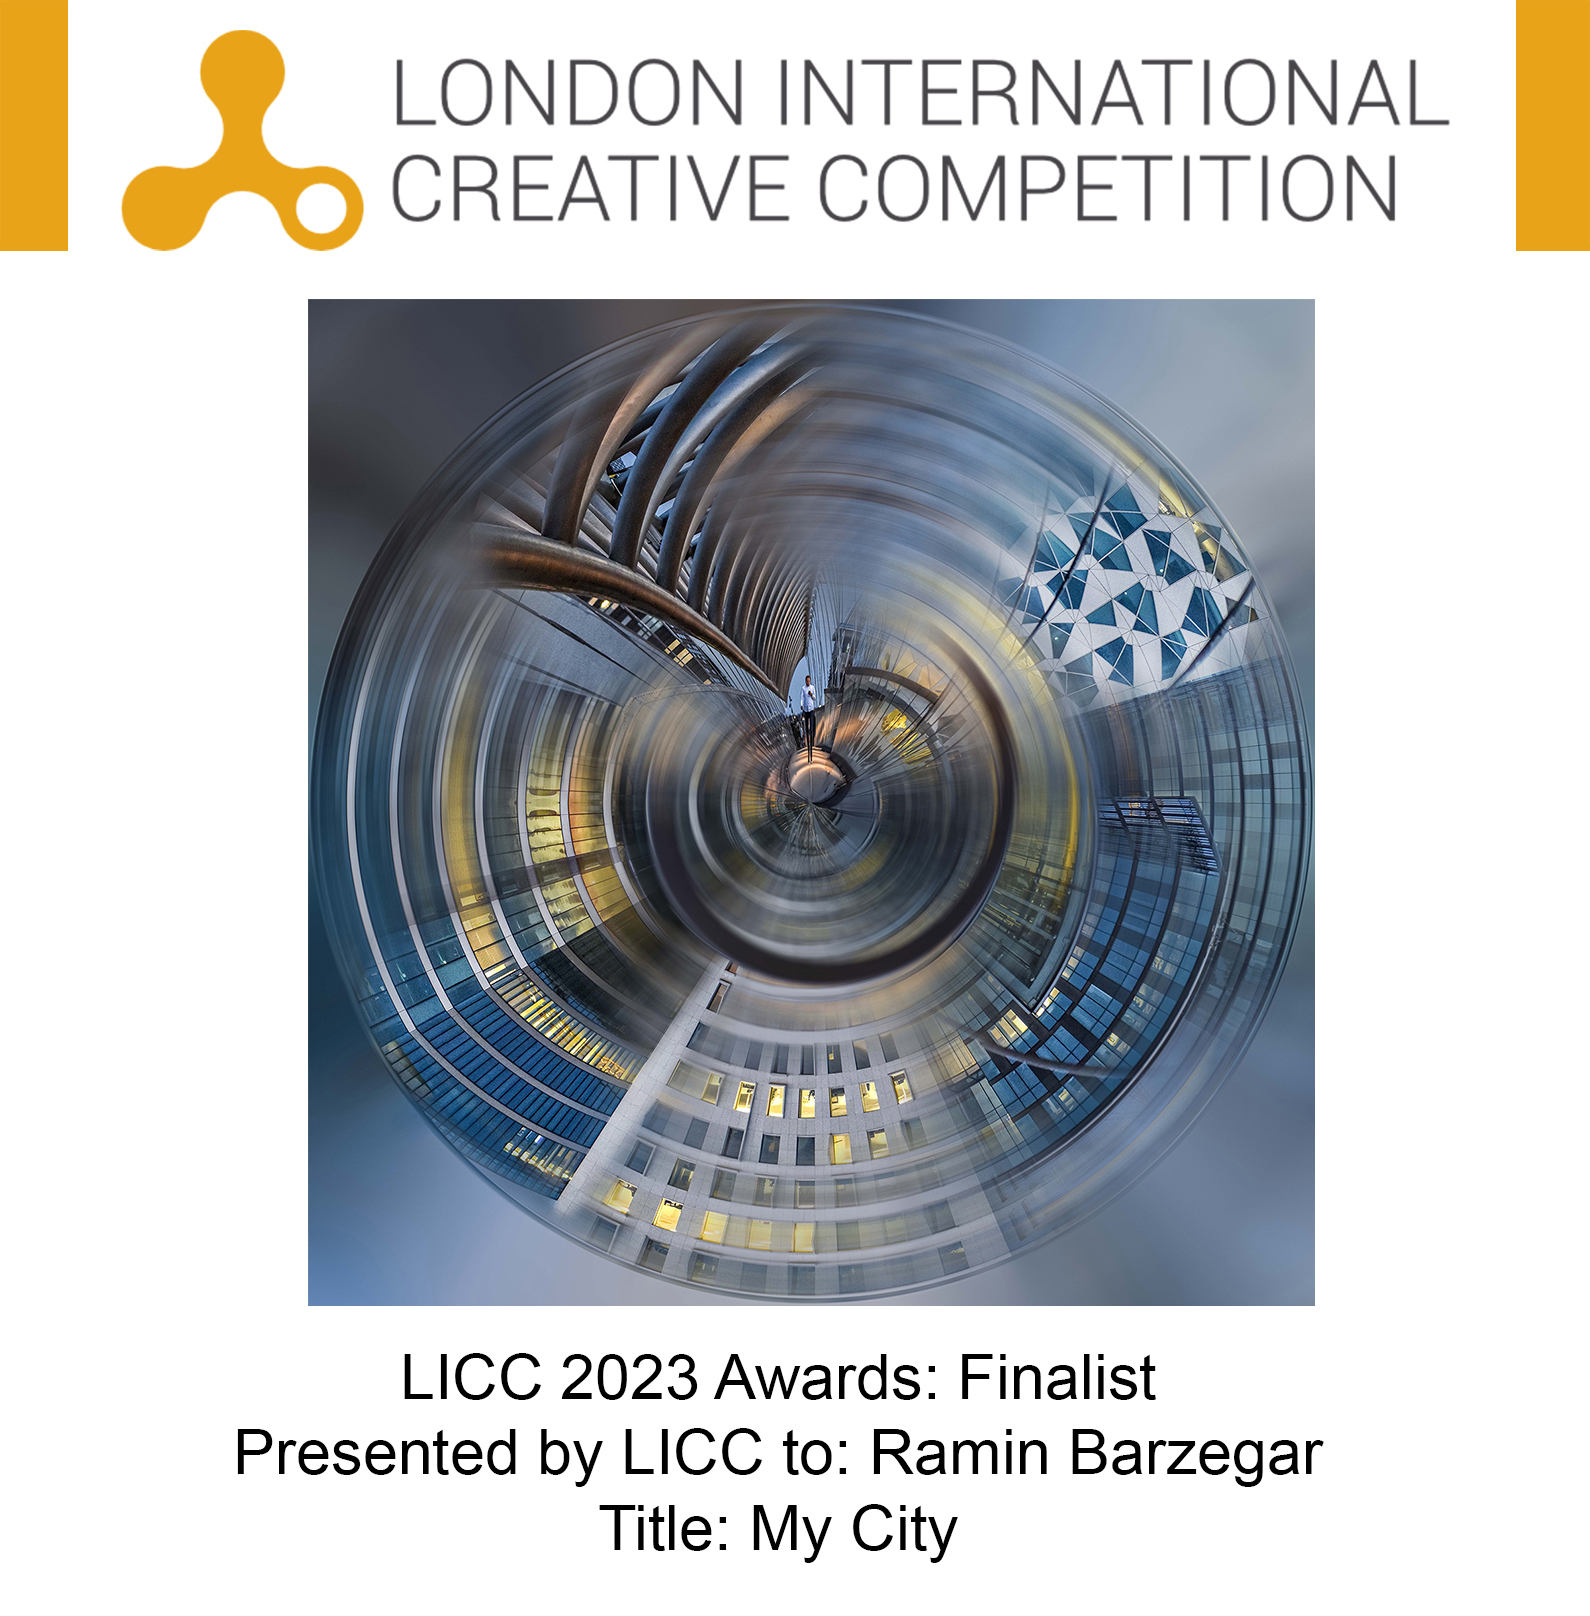 Award:
FINALIST
Presented by LICC to:
Ramin Barzegar
Title of Submission:
My City
Category:
SHOOT (Photo/Video) - Professional